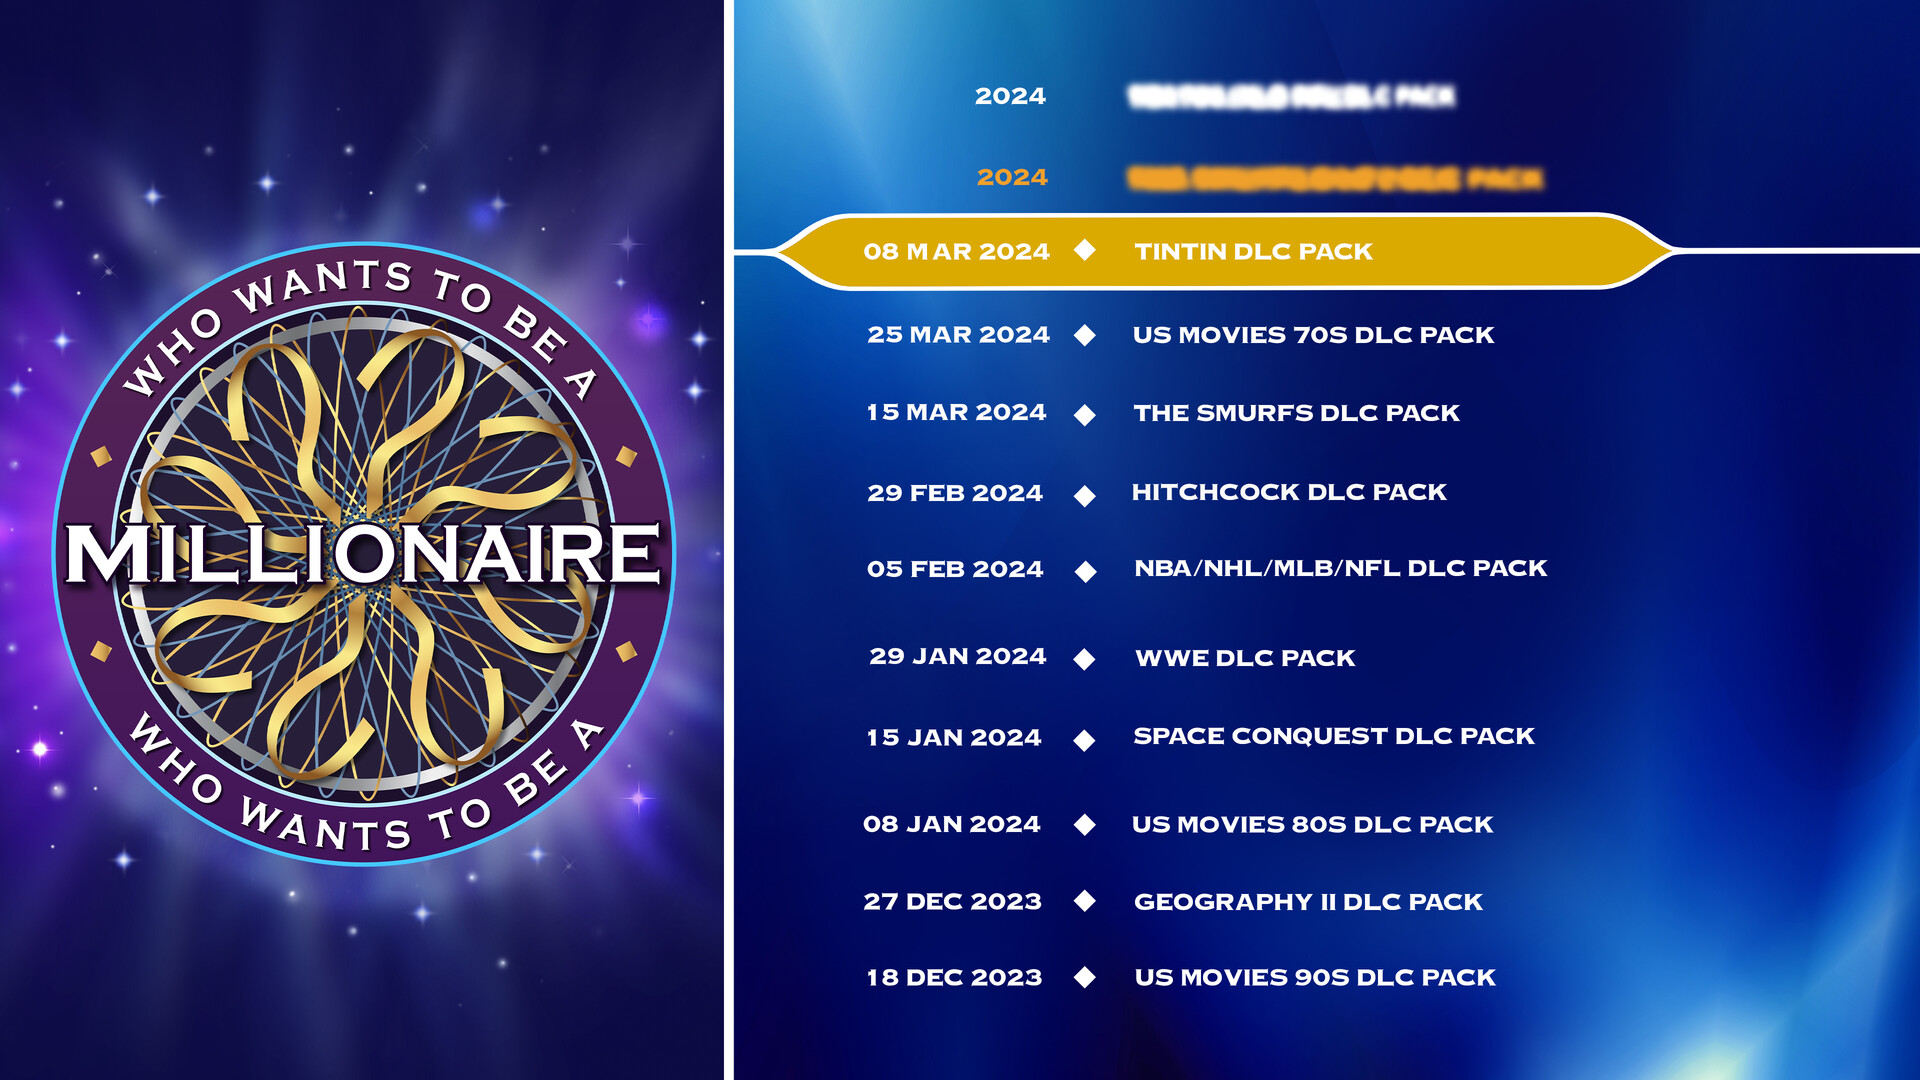 Who Wants to Be a Millionaire? - Season Pass Featured Screenshot #1